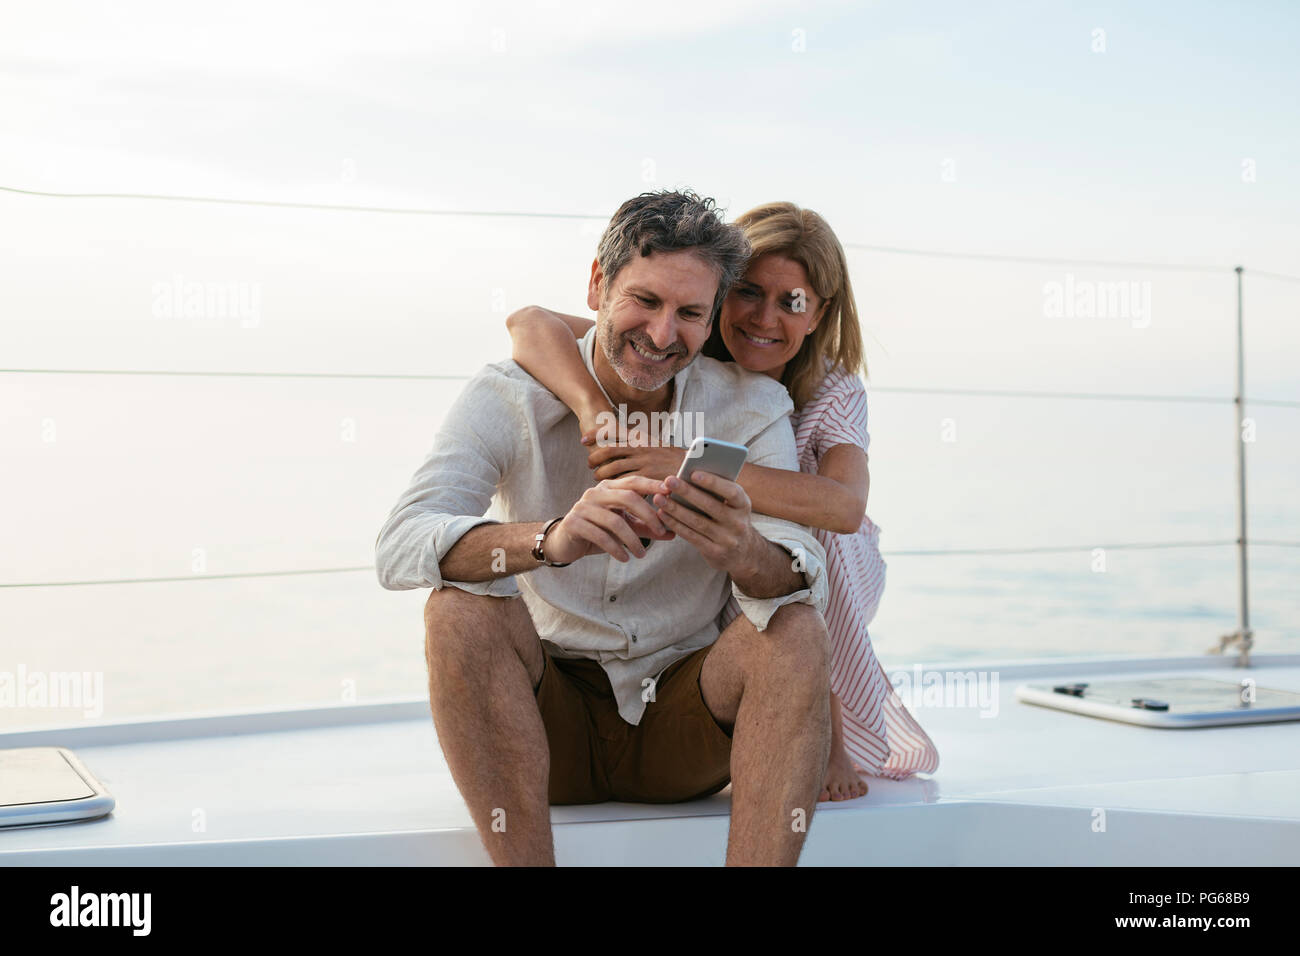 Mature couple looking at smartphone, sitting on a sailing boat Stock Photo